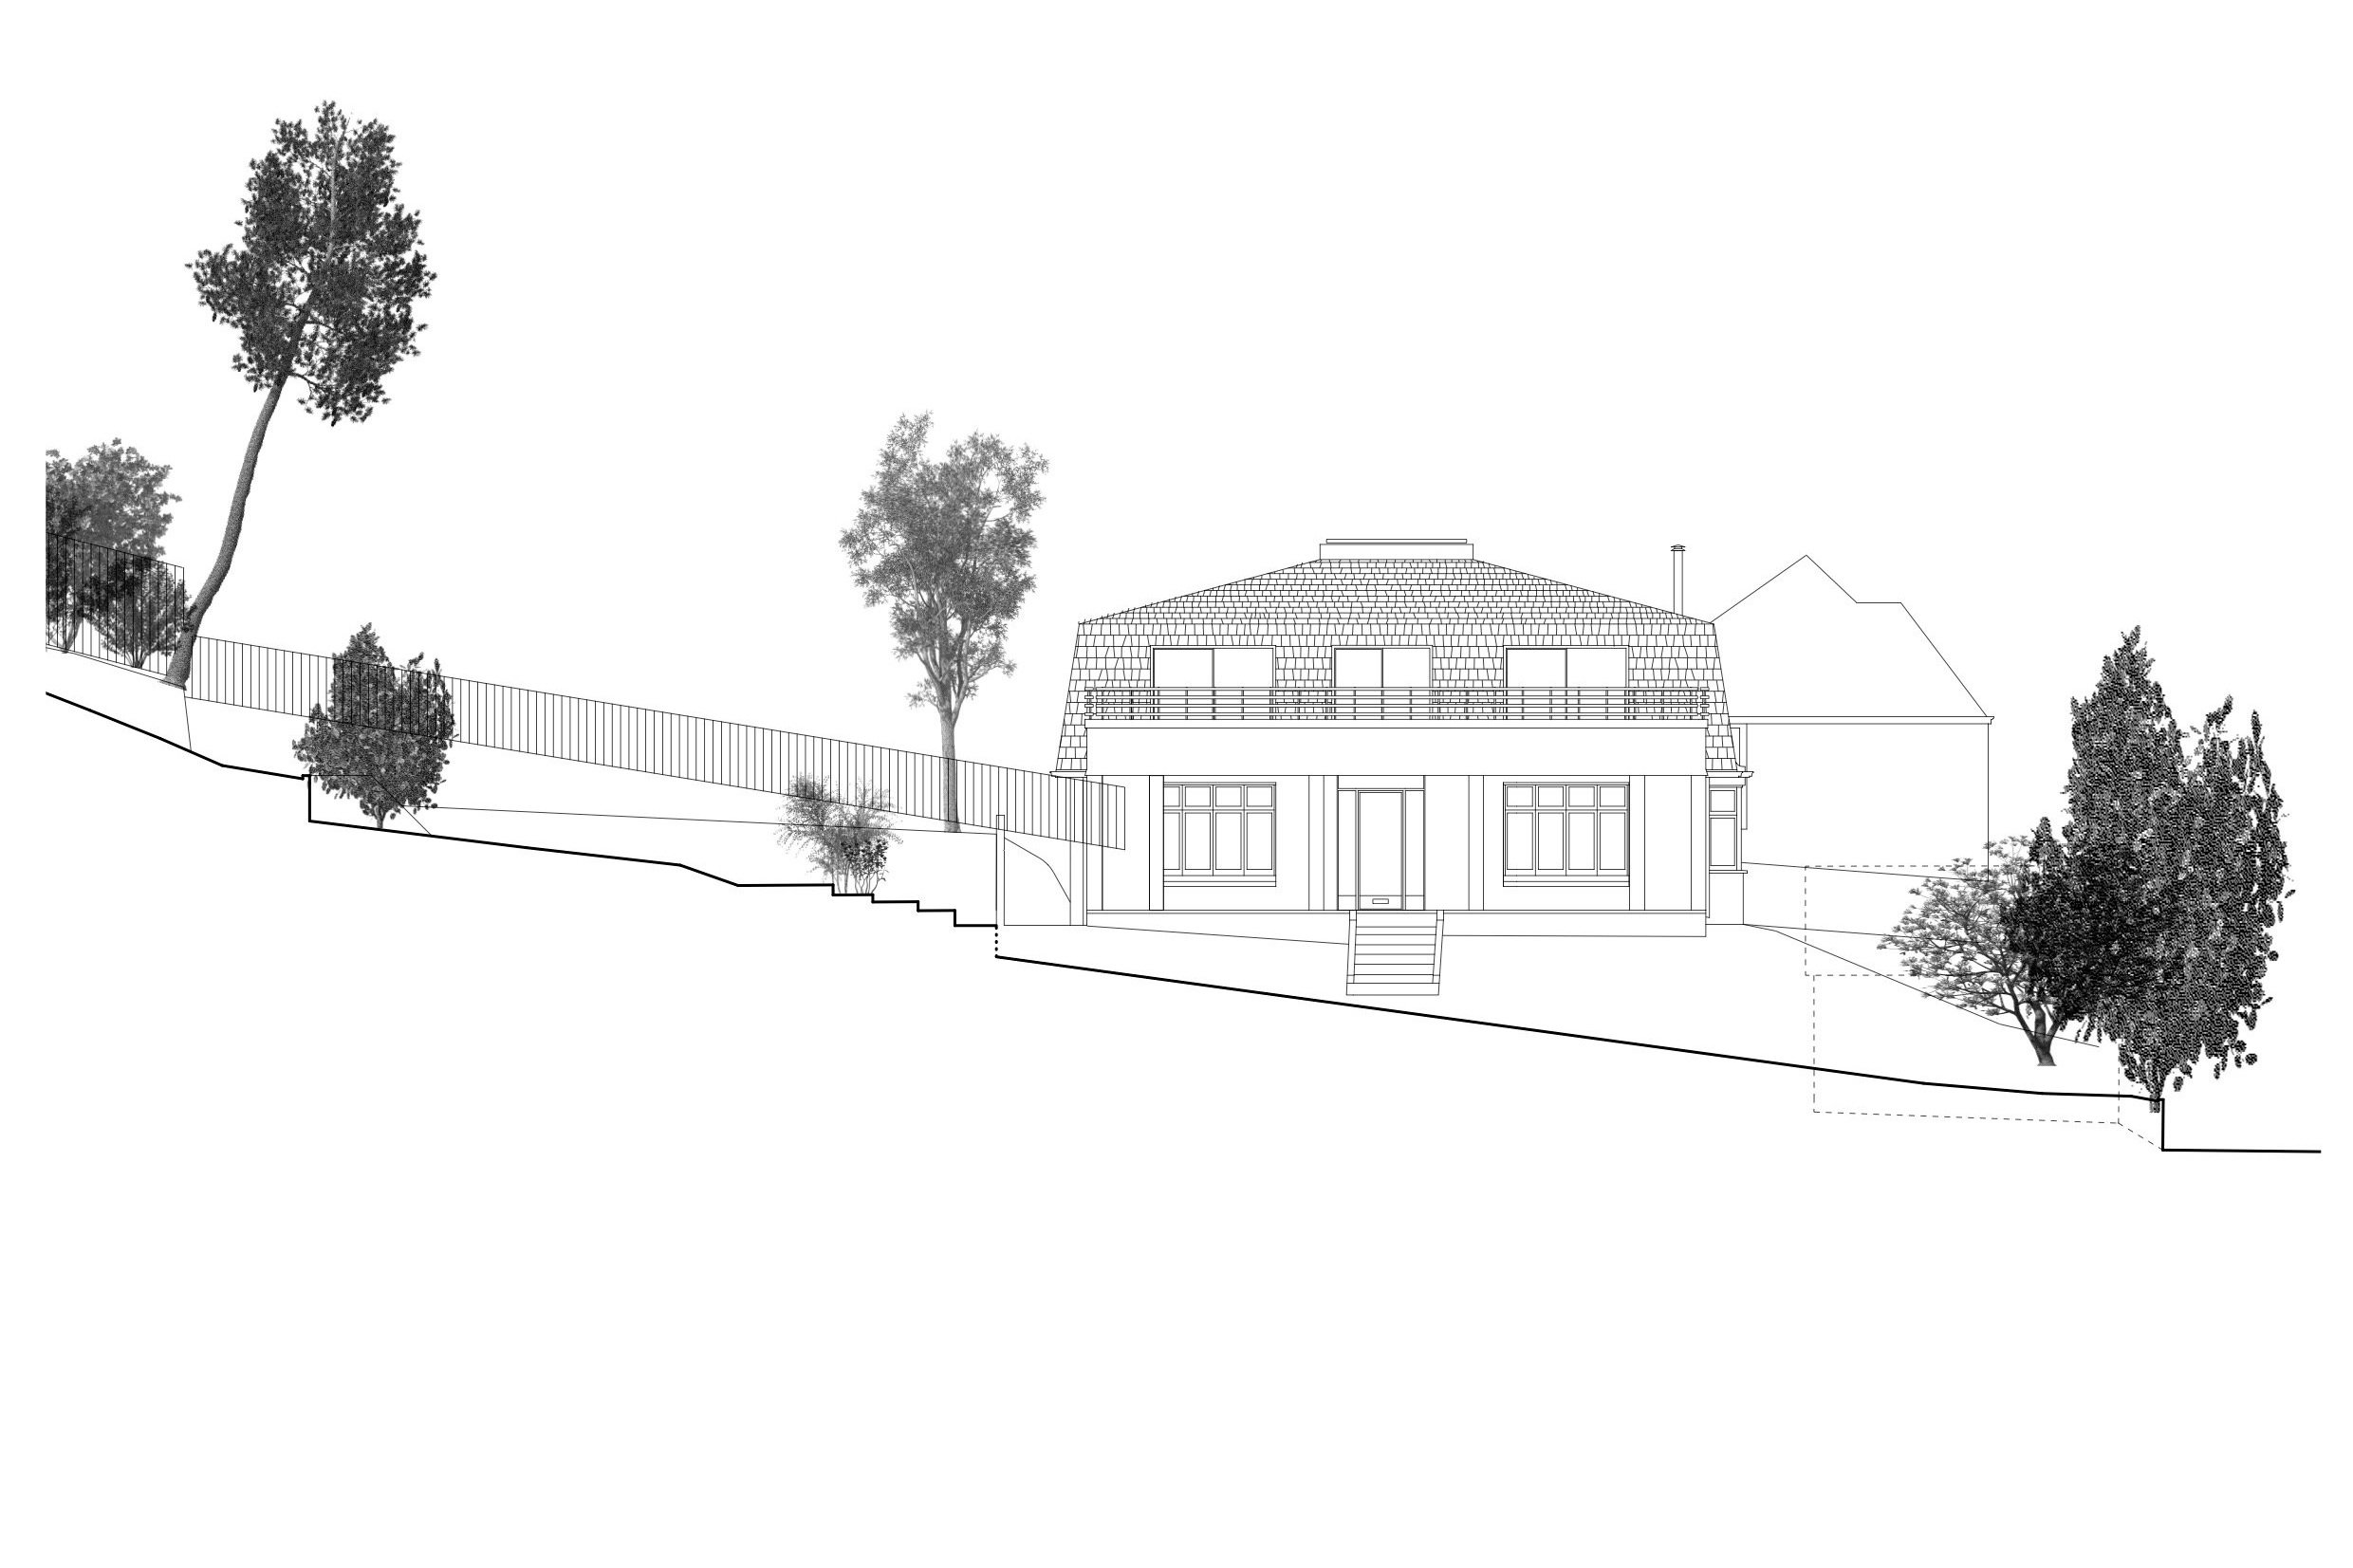 Proposed East Elevation